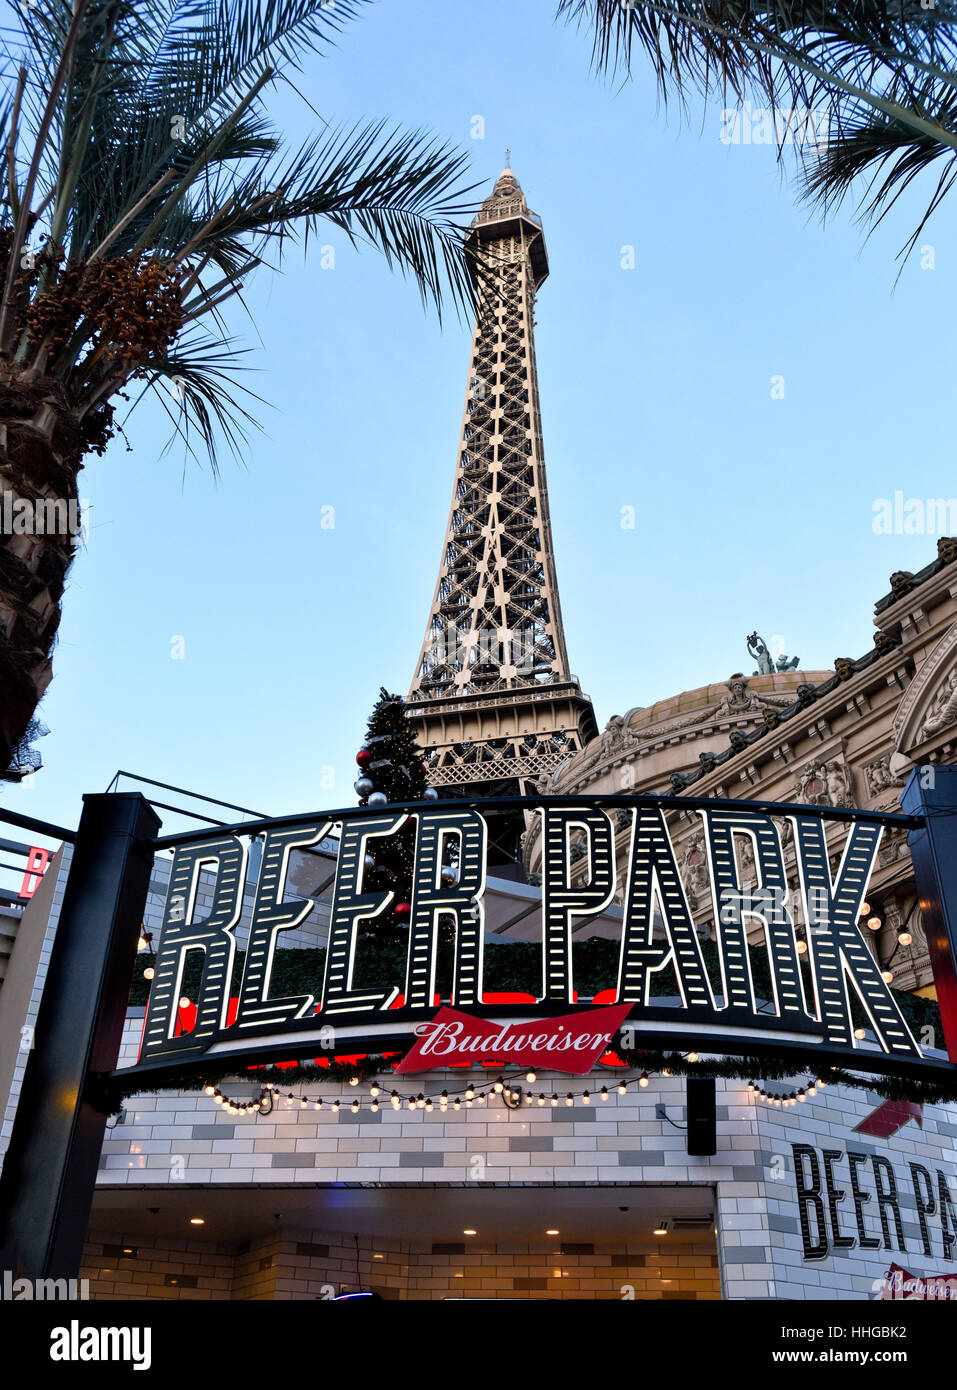 Beer Park and the Eiffel Tower in the Paris section of the Las Vegas Strip. Stock Photo